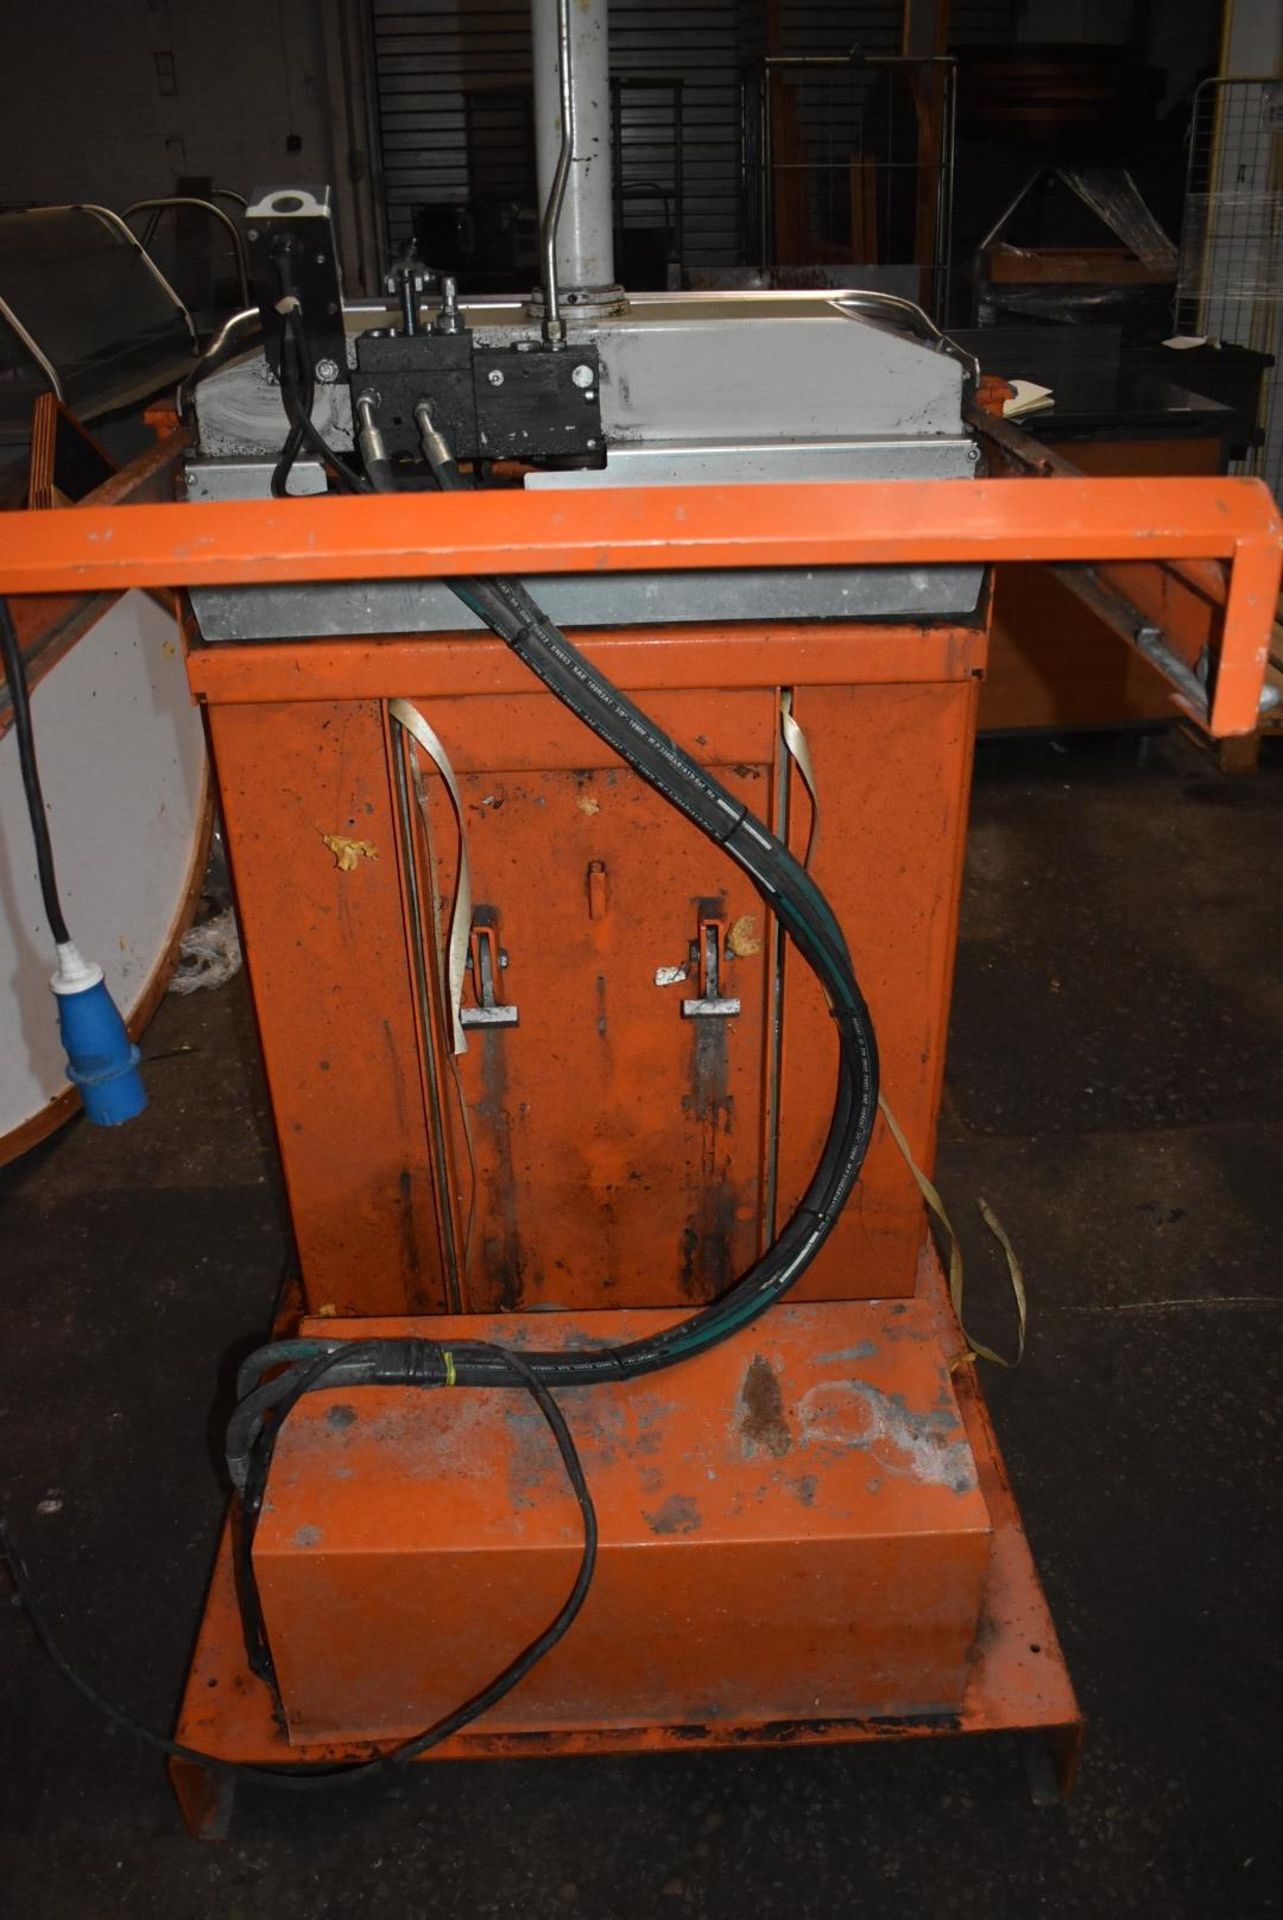 1 x Orwak 5010 Hydraulic Press Compact Cardboard Baler - Used For Compacting Recyclable or Non- - Image 15 of 15